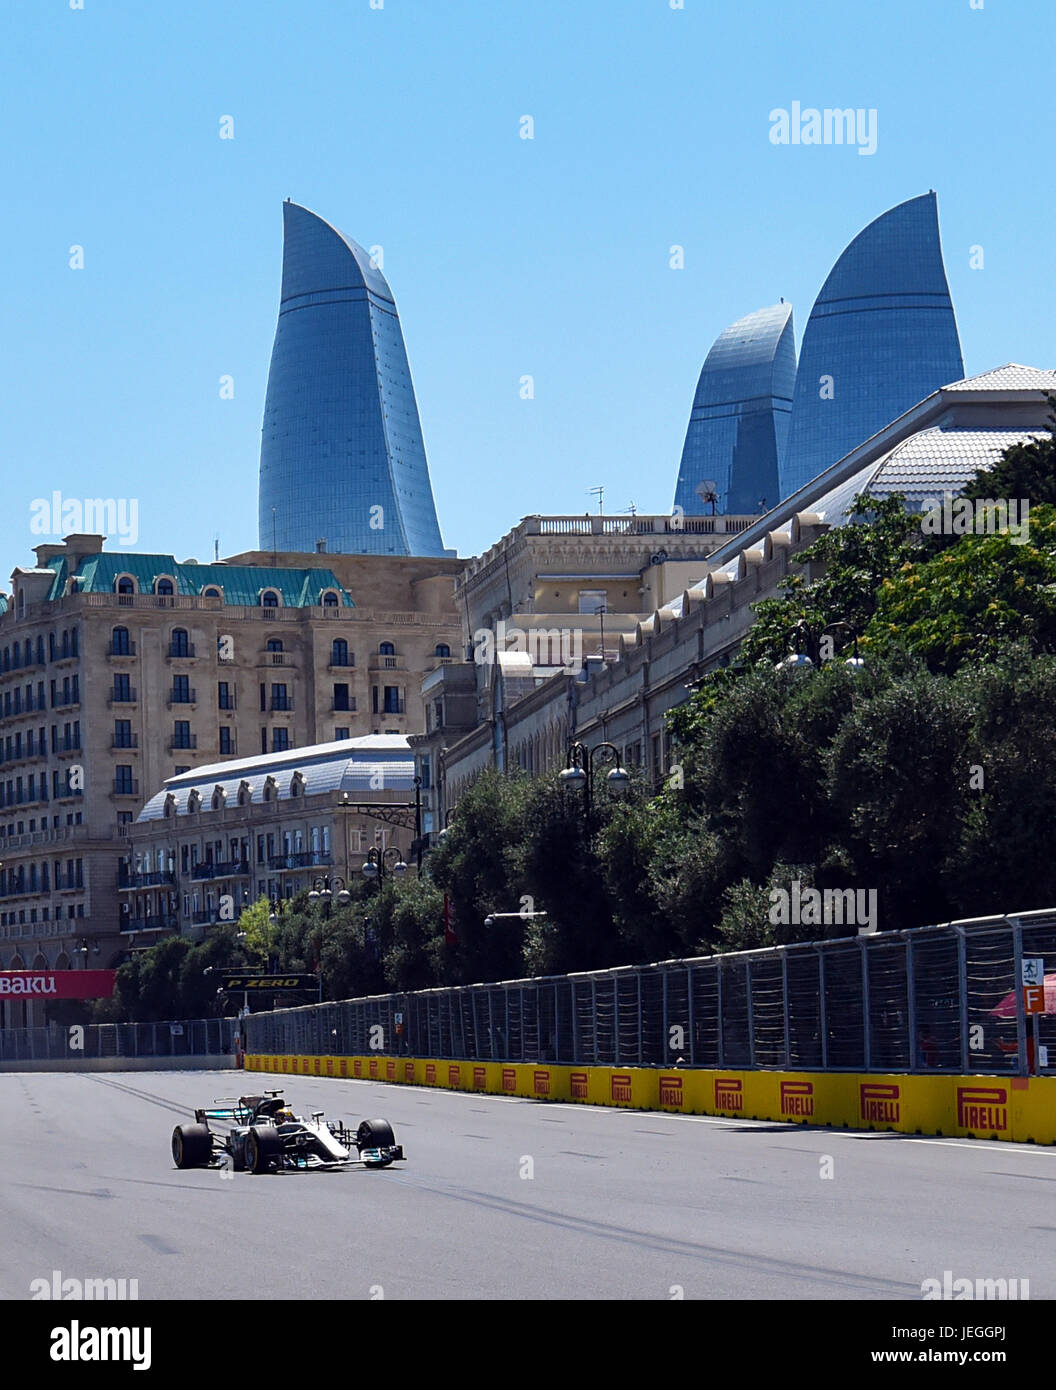 Baku, Azerbaijan. 24th June, 2017. Lewis Hamilton of the Mercedes team competes during the qualifying race of the 2017 Azerbaijan Grand Prix in Baku, Azerbaijan, on June 24, 2017. Credit: Tofiq Babayev/Xinhua/Alamy Live News Stock Photo